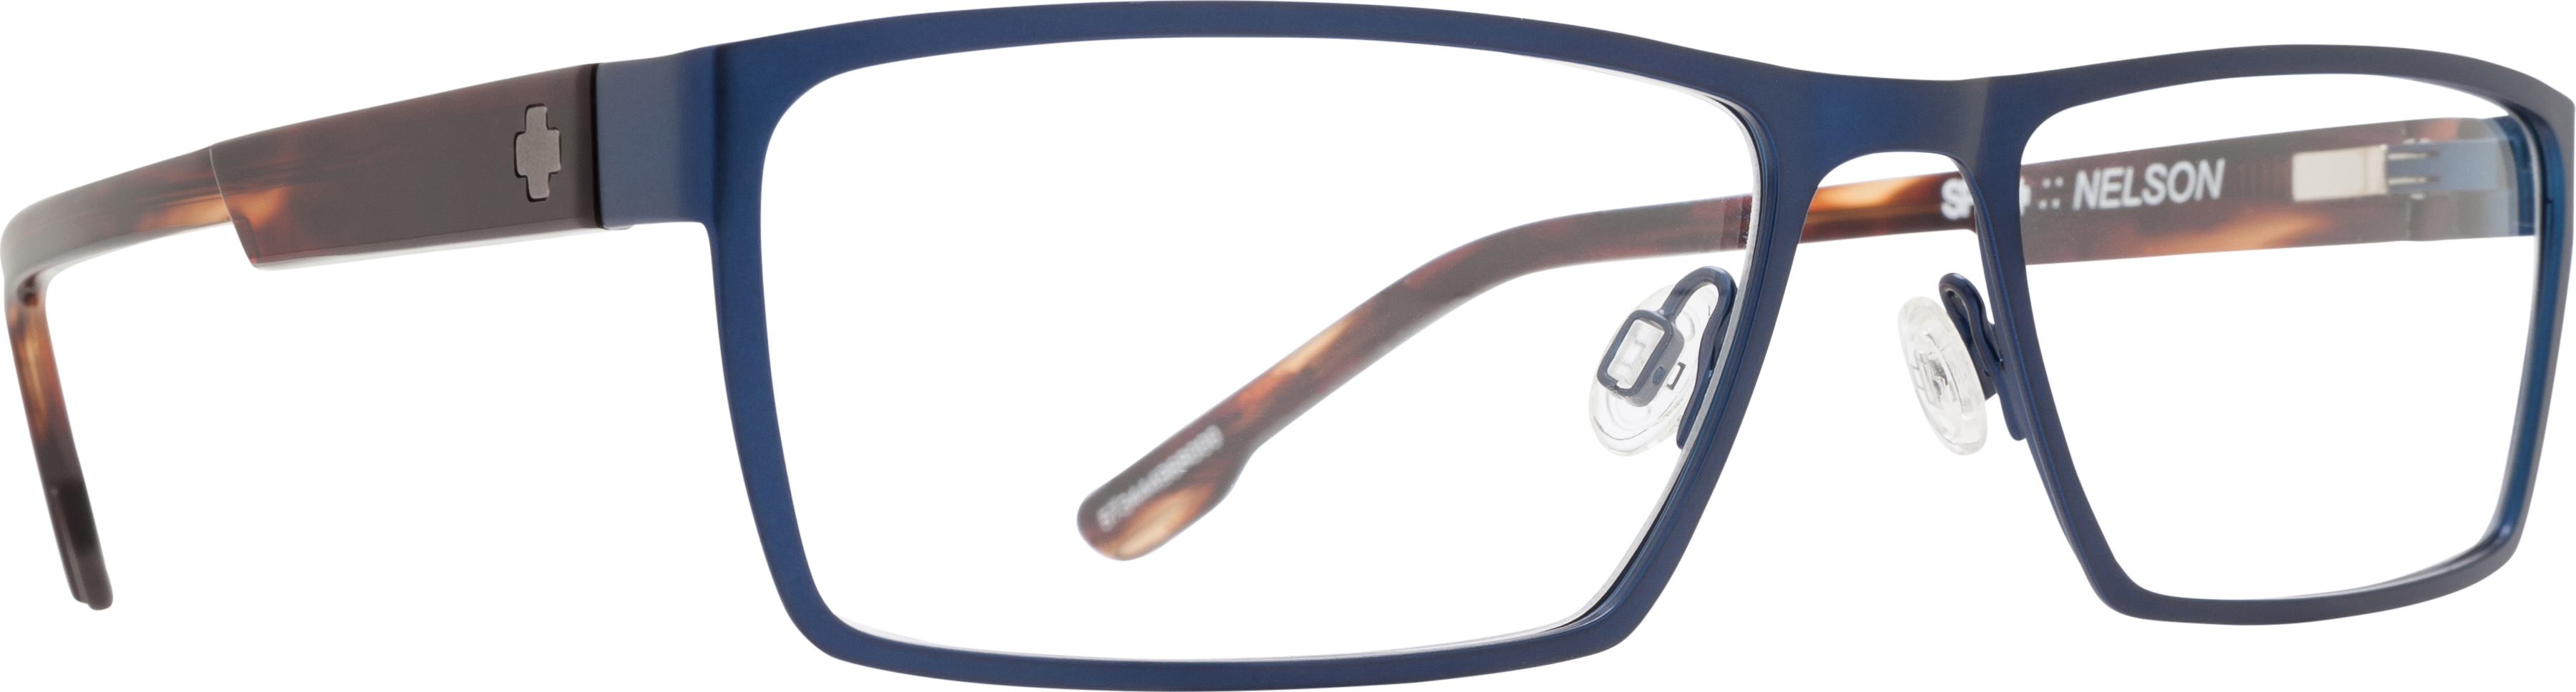 Picture of Spy Eyeglasses NELSON